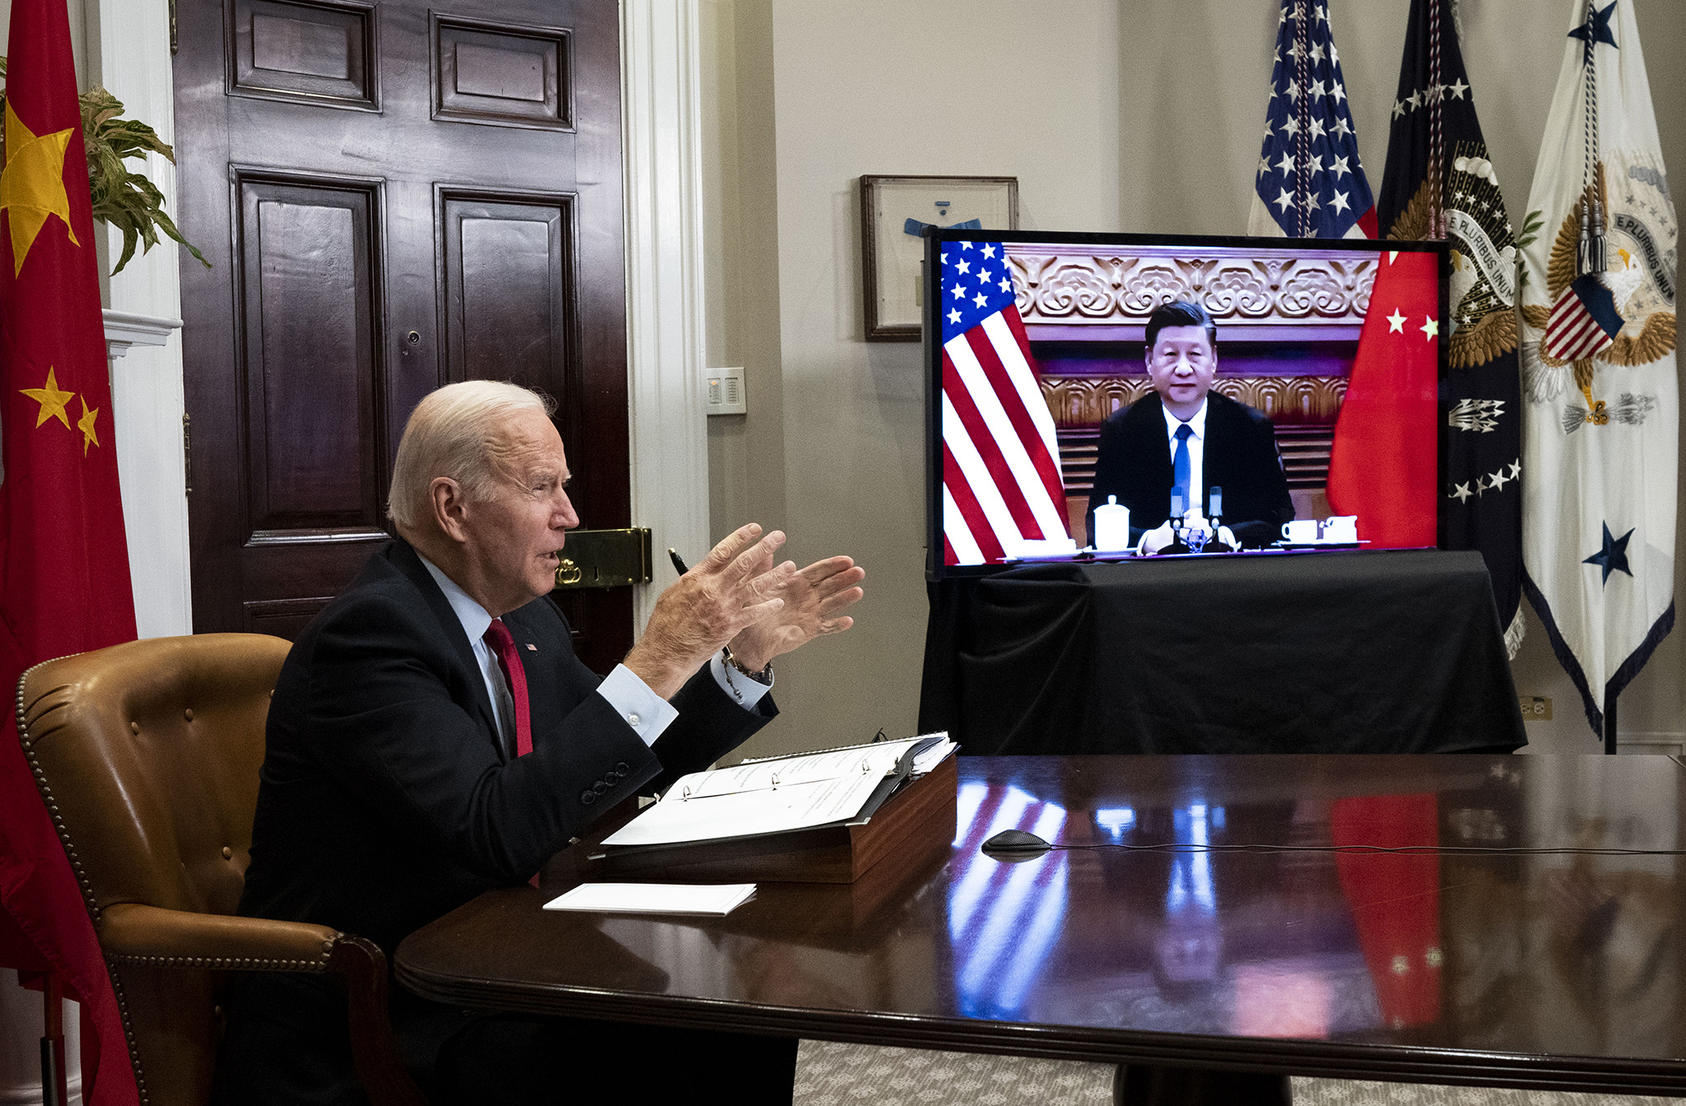 President Joe Biden takes notes during a video summit with President Xi Jinping of China at the White House on Nov. 15, 2021. The personal relationship between the two leaders could help stabilize relations between the two nations. (Doug Mills/The New York Times)